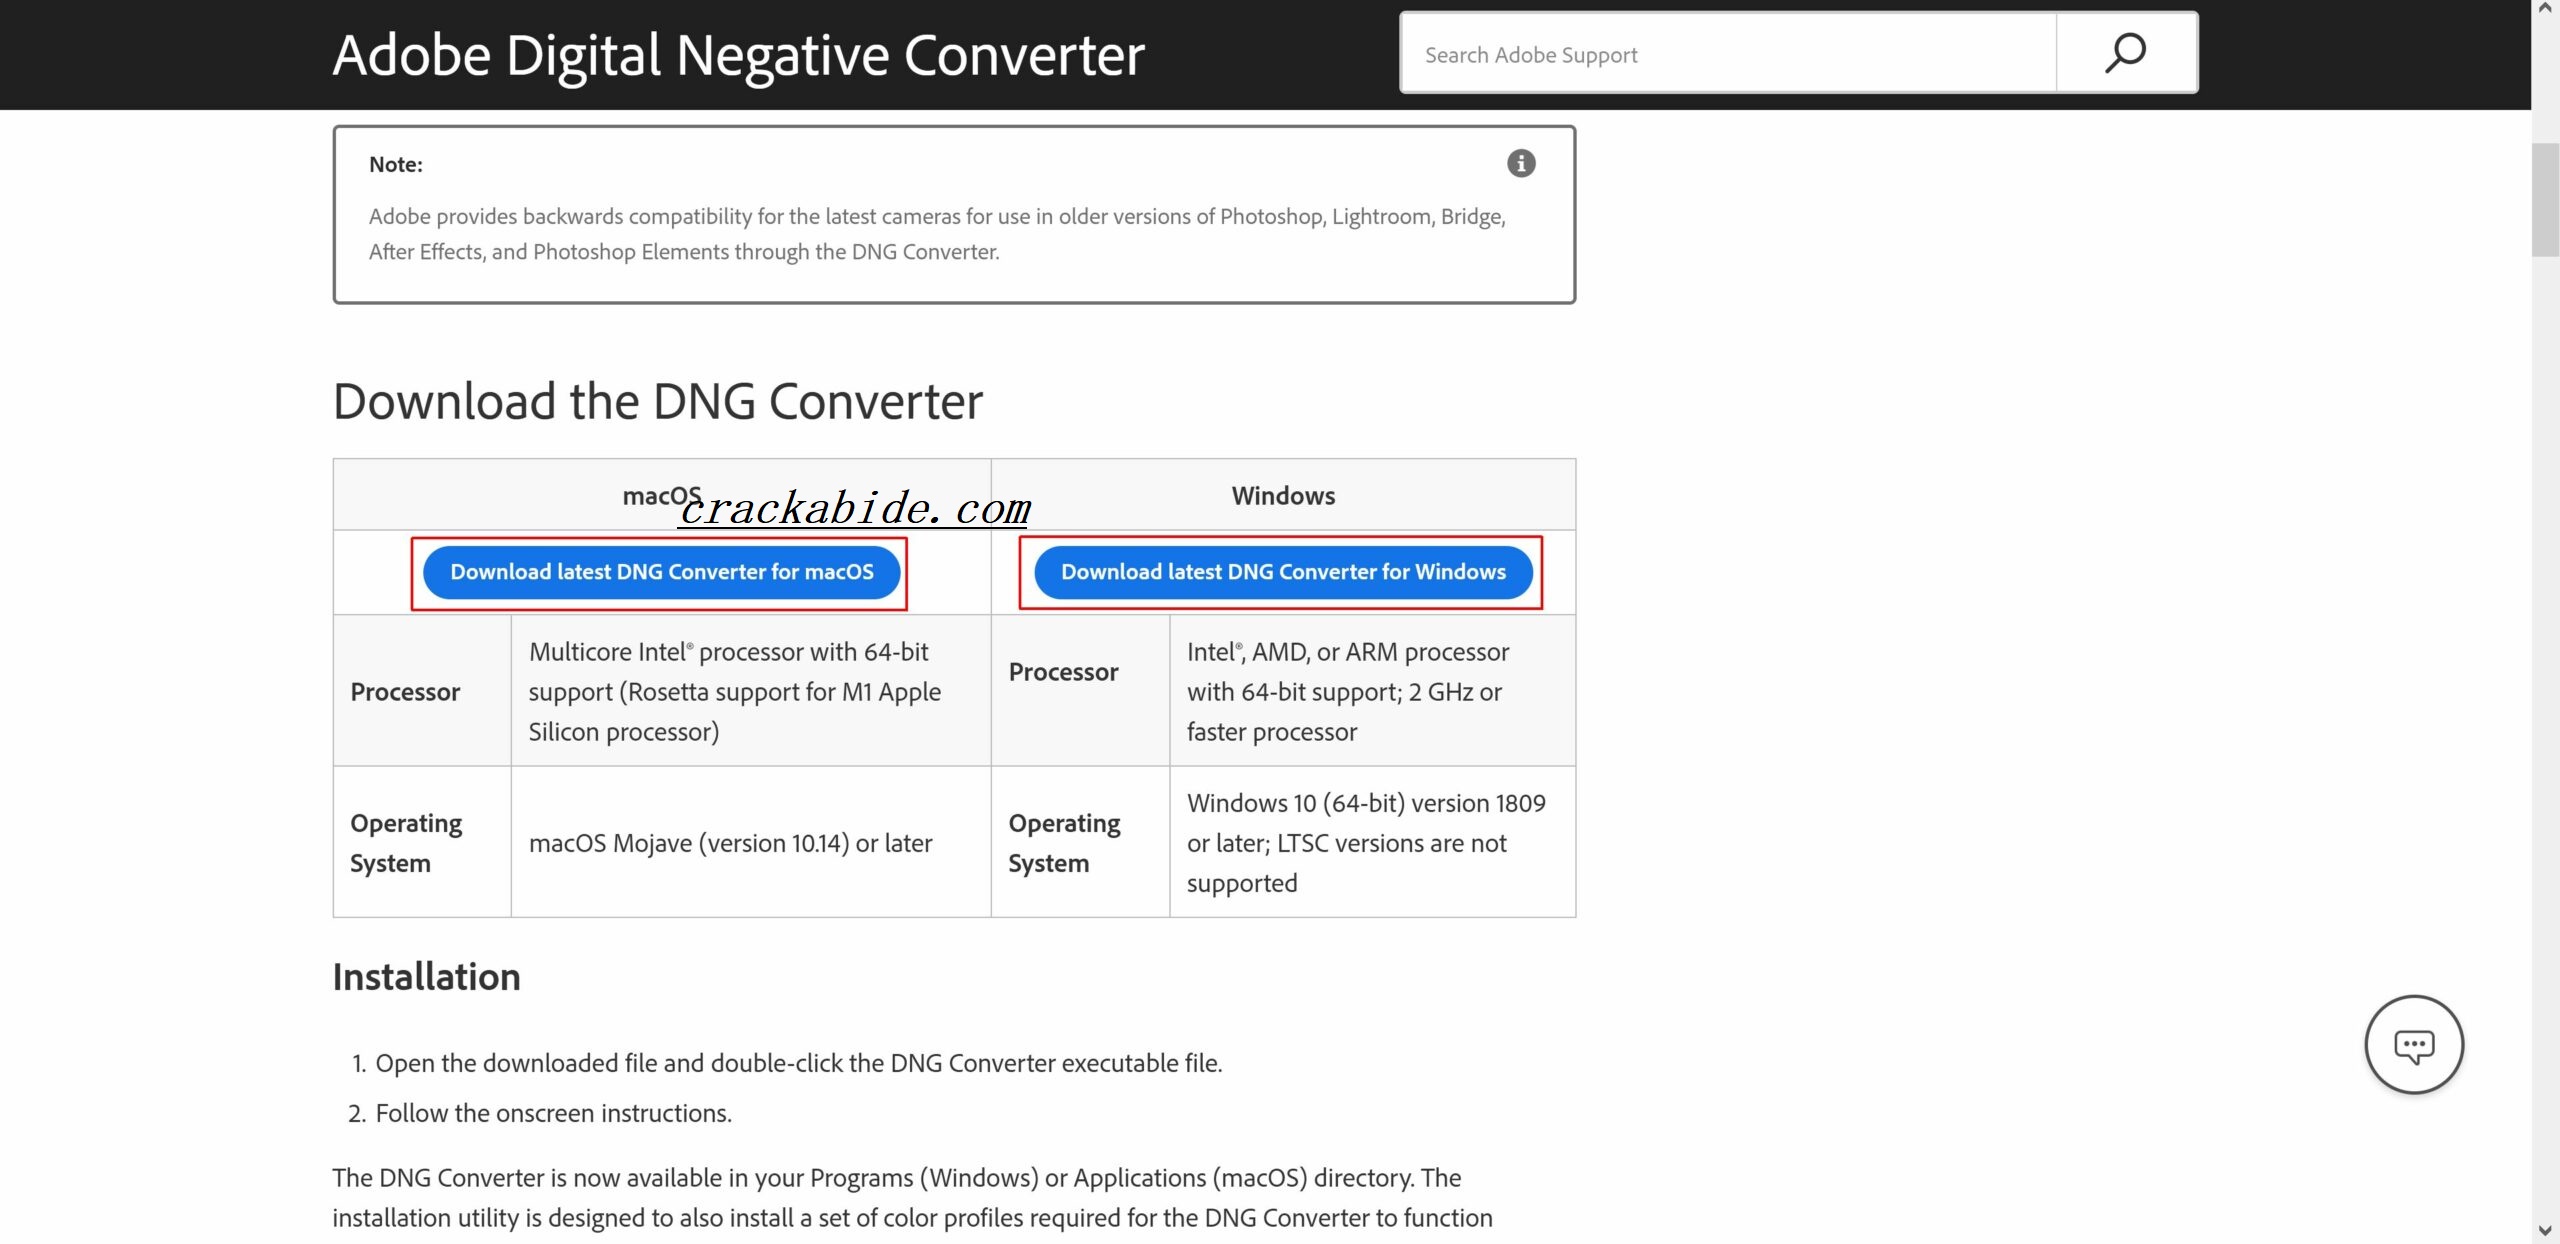 Adobe DNG Converter Latest Download